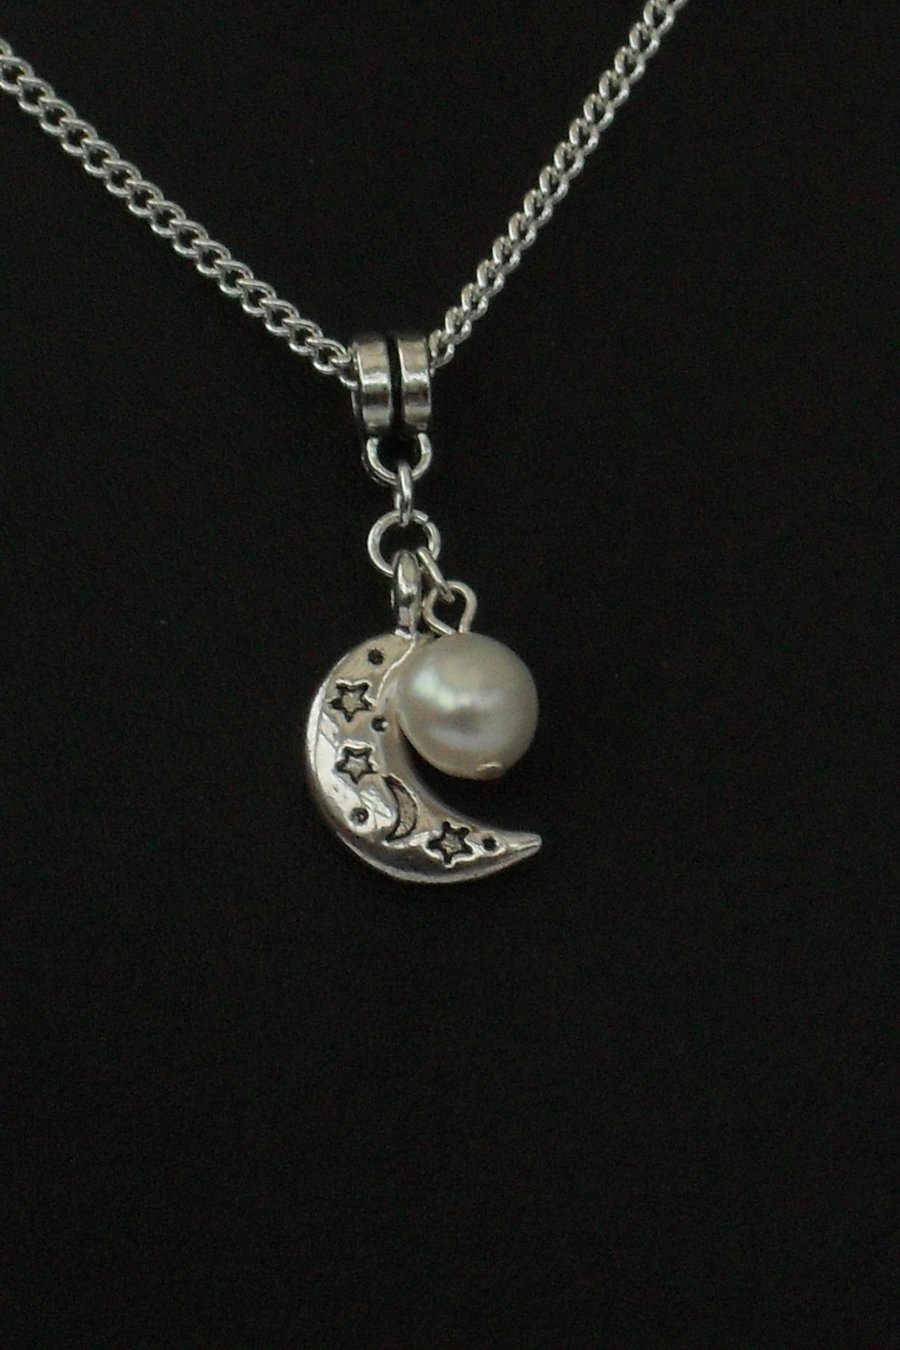  White pearl and moon charm necklace